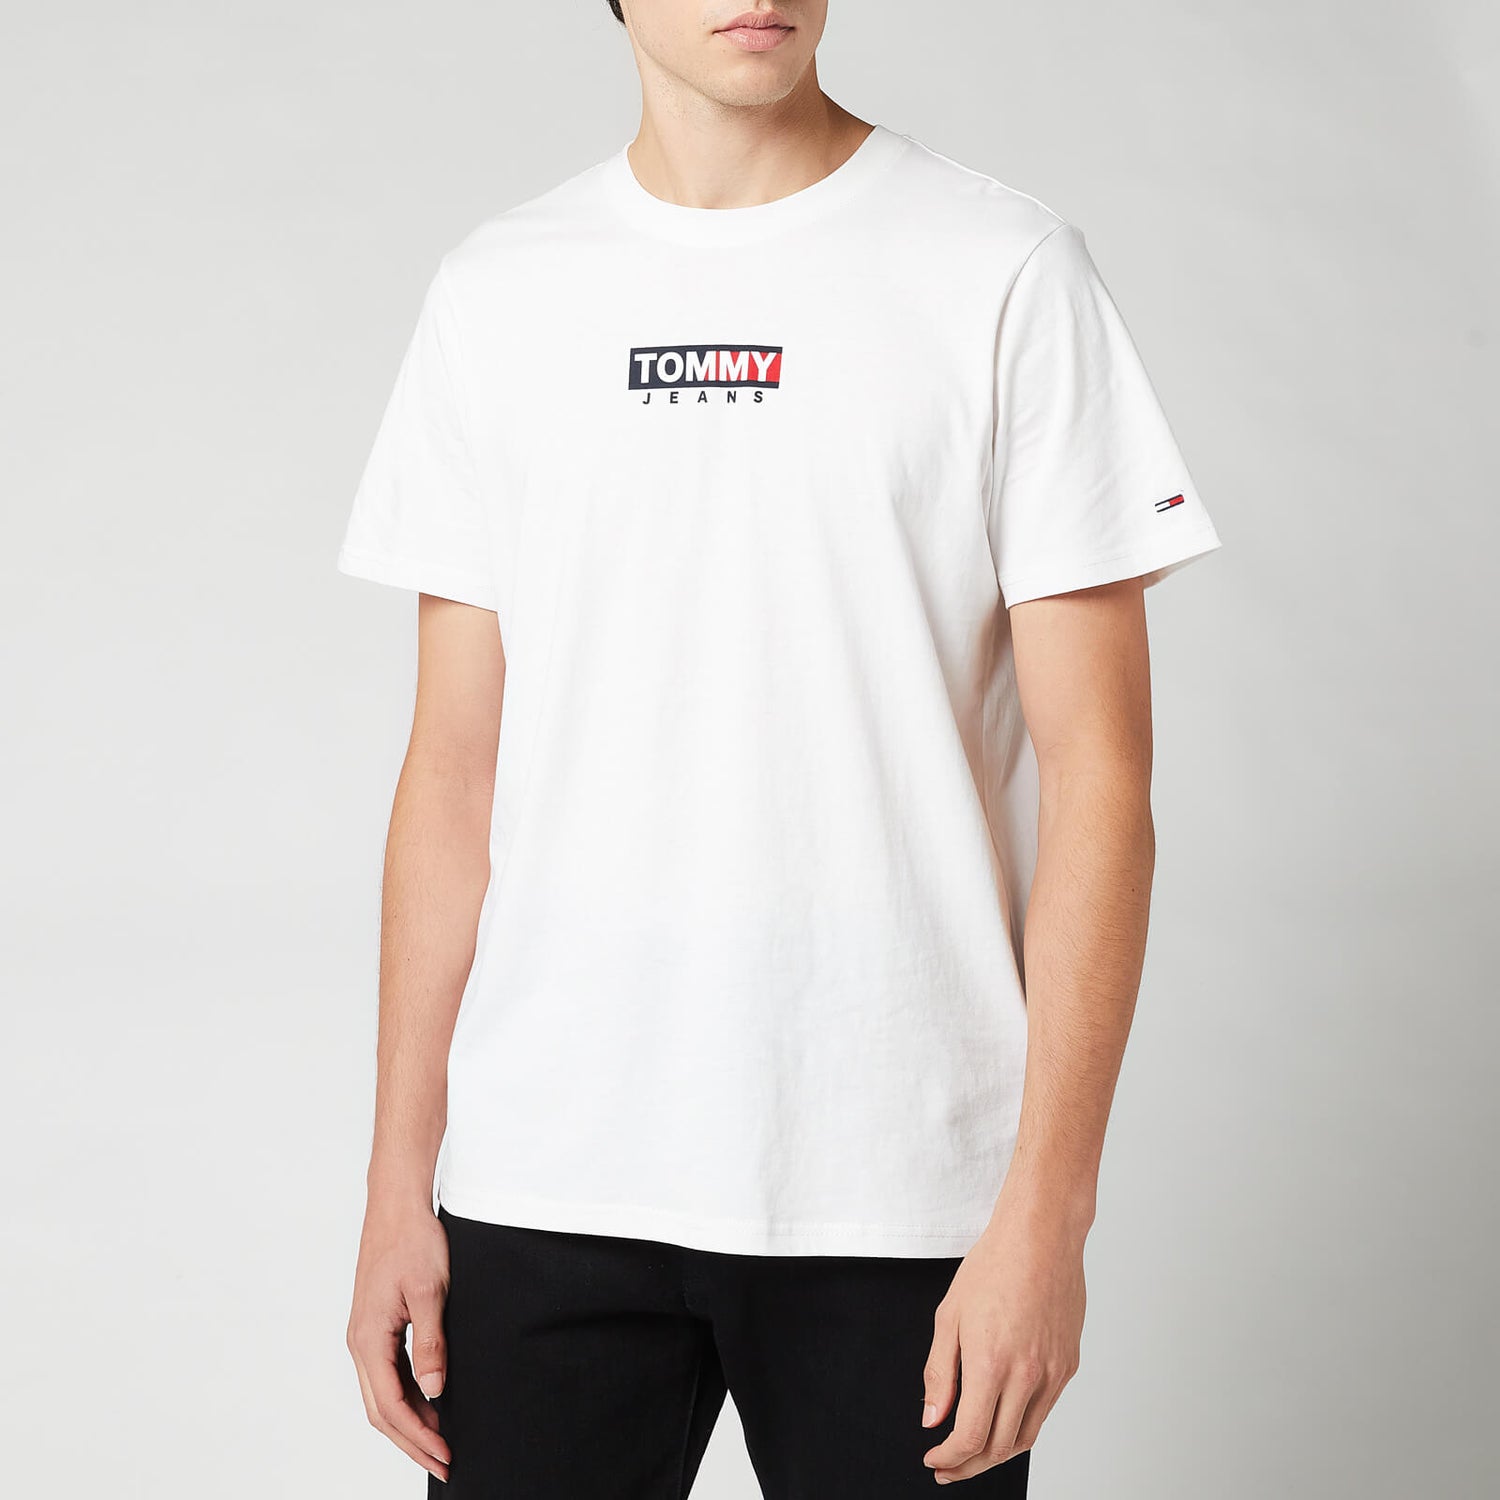 Tommy Jeans Men's Entry Print T-Shirt - White